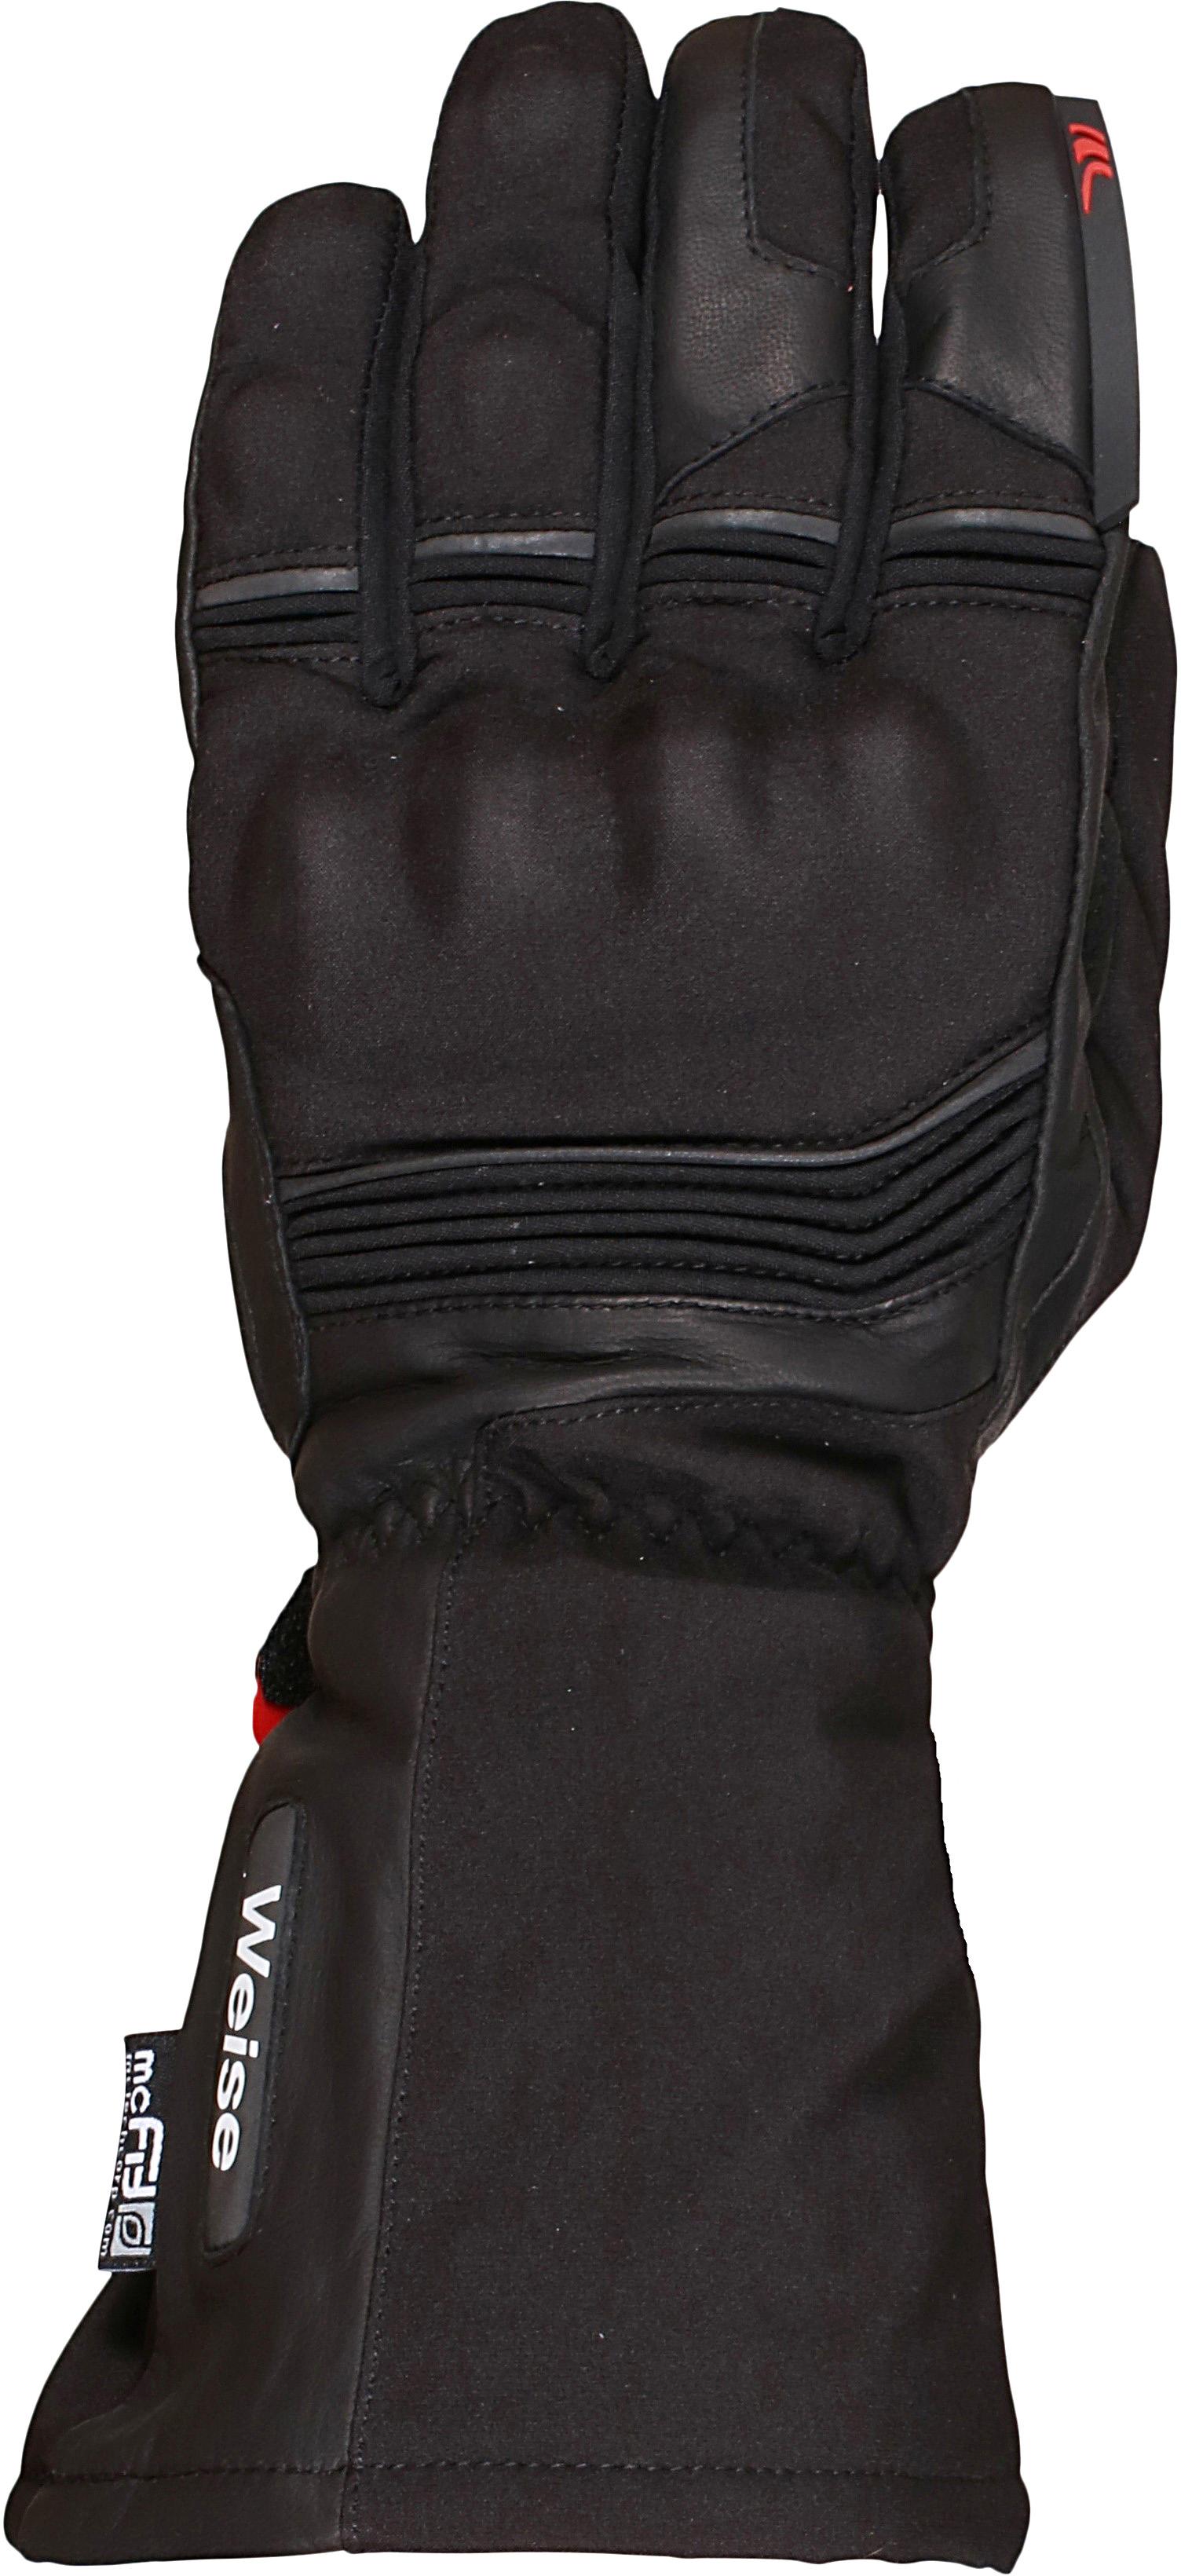 Weise Montana 150 Motorcycle Gloves - Black, L